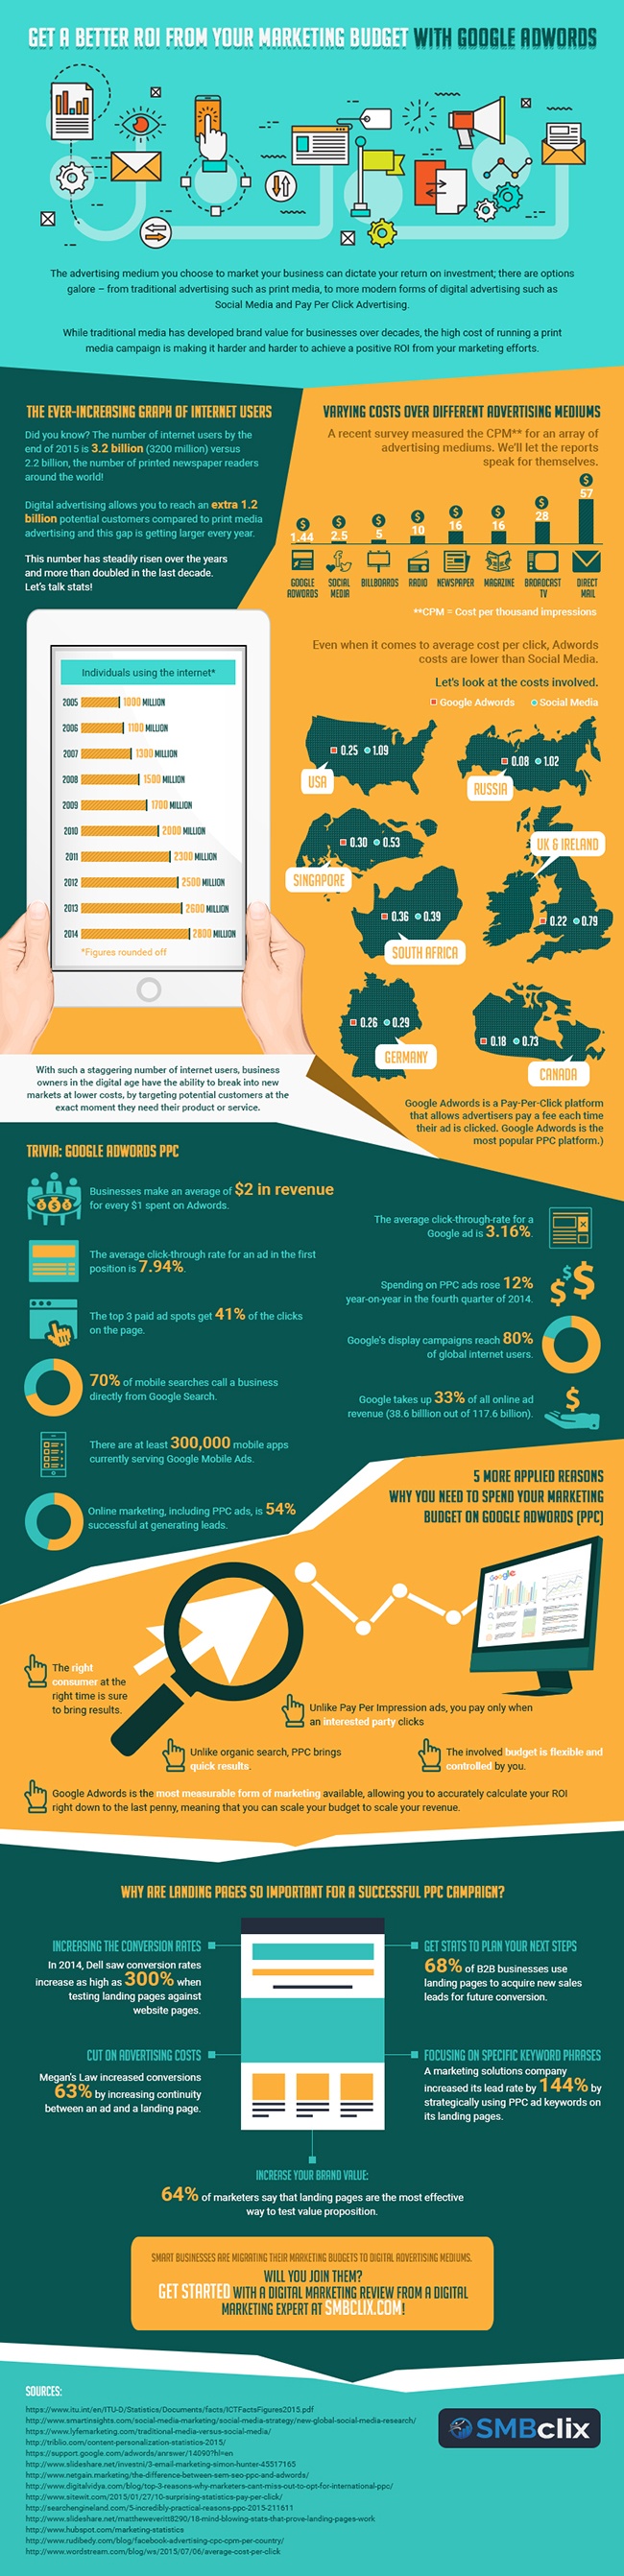 Google_AdWords_Campaign_Infographic